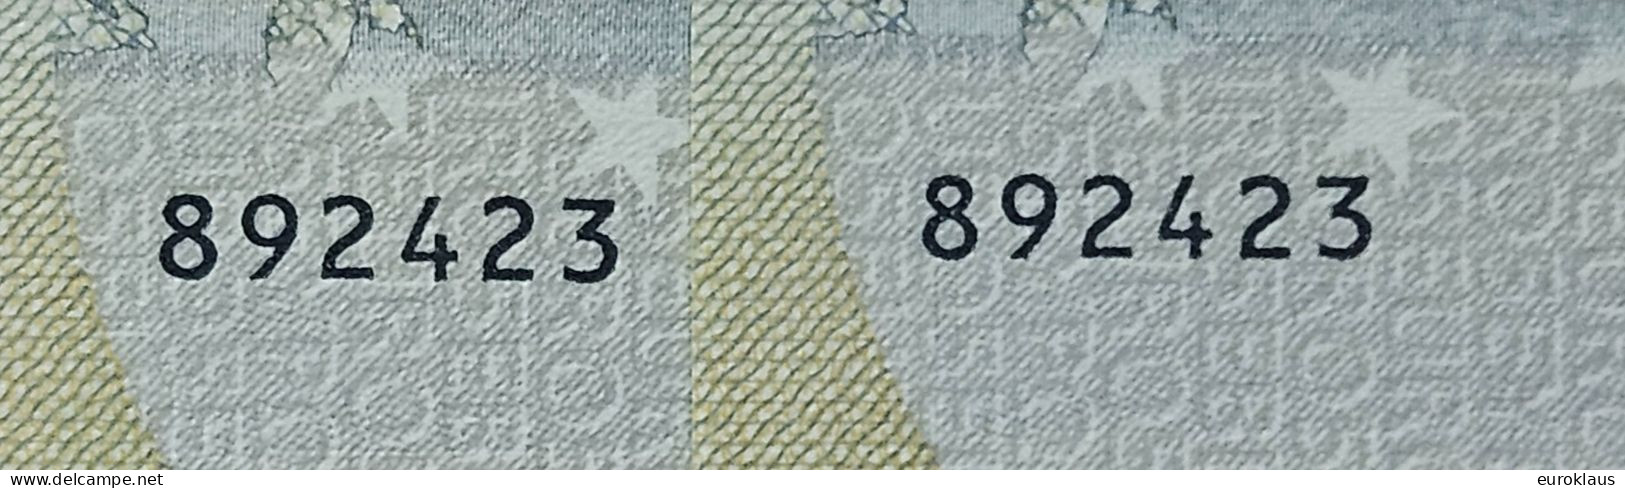 PAIR V011D5/G5 UNC WITH THE SAME NUMBERS - 5 Euro